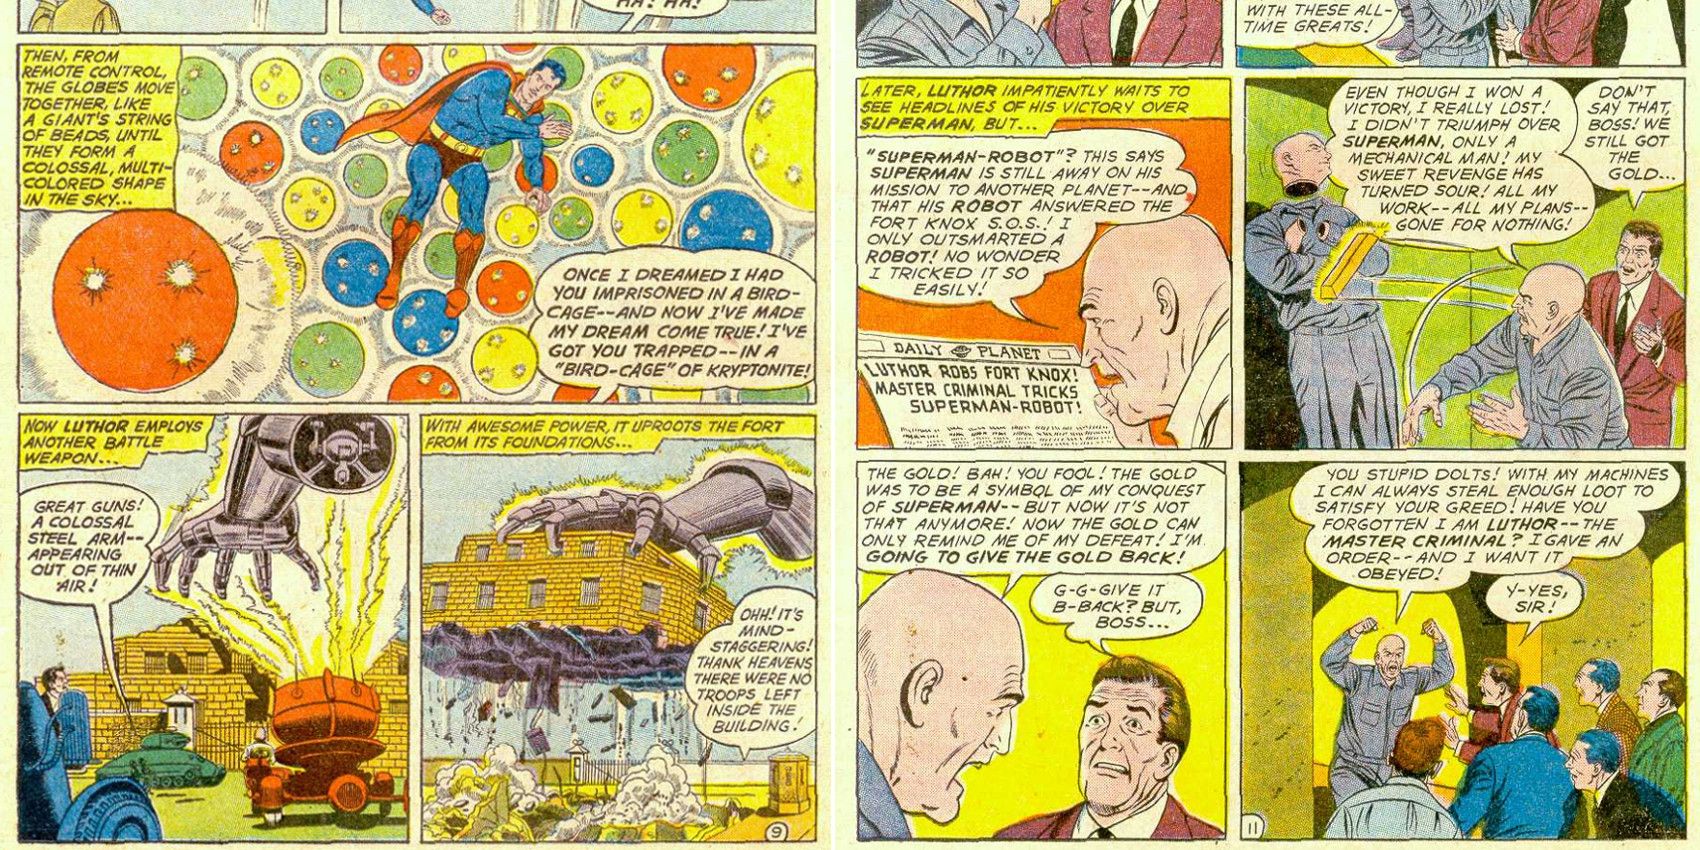 Lex Luthor robs Fort Knox